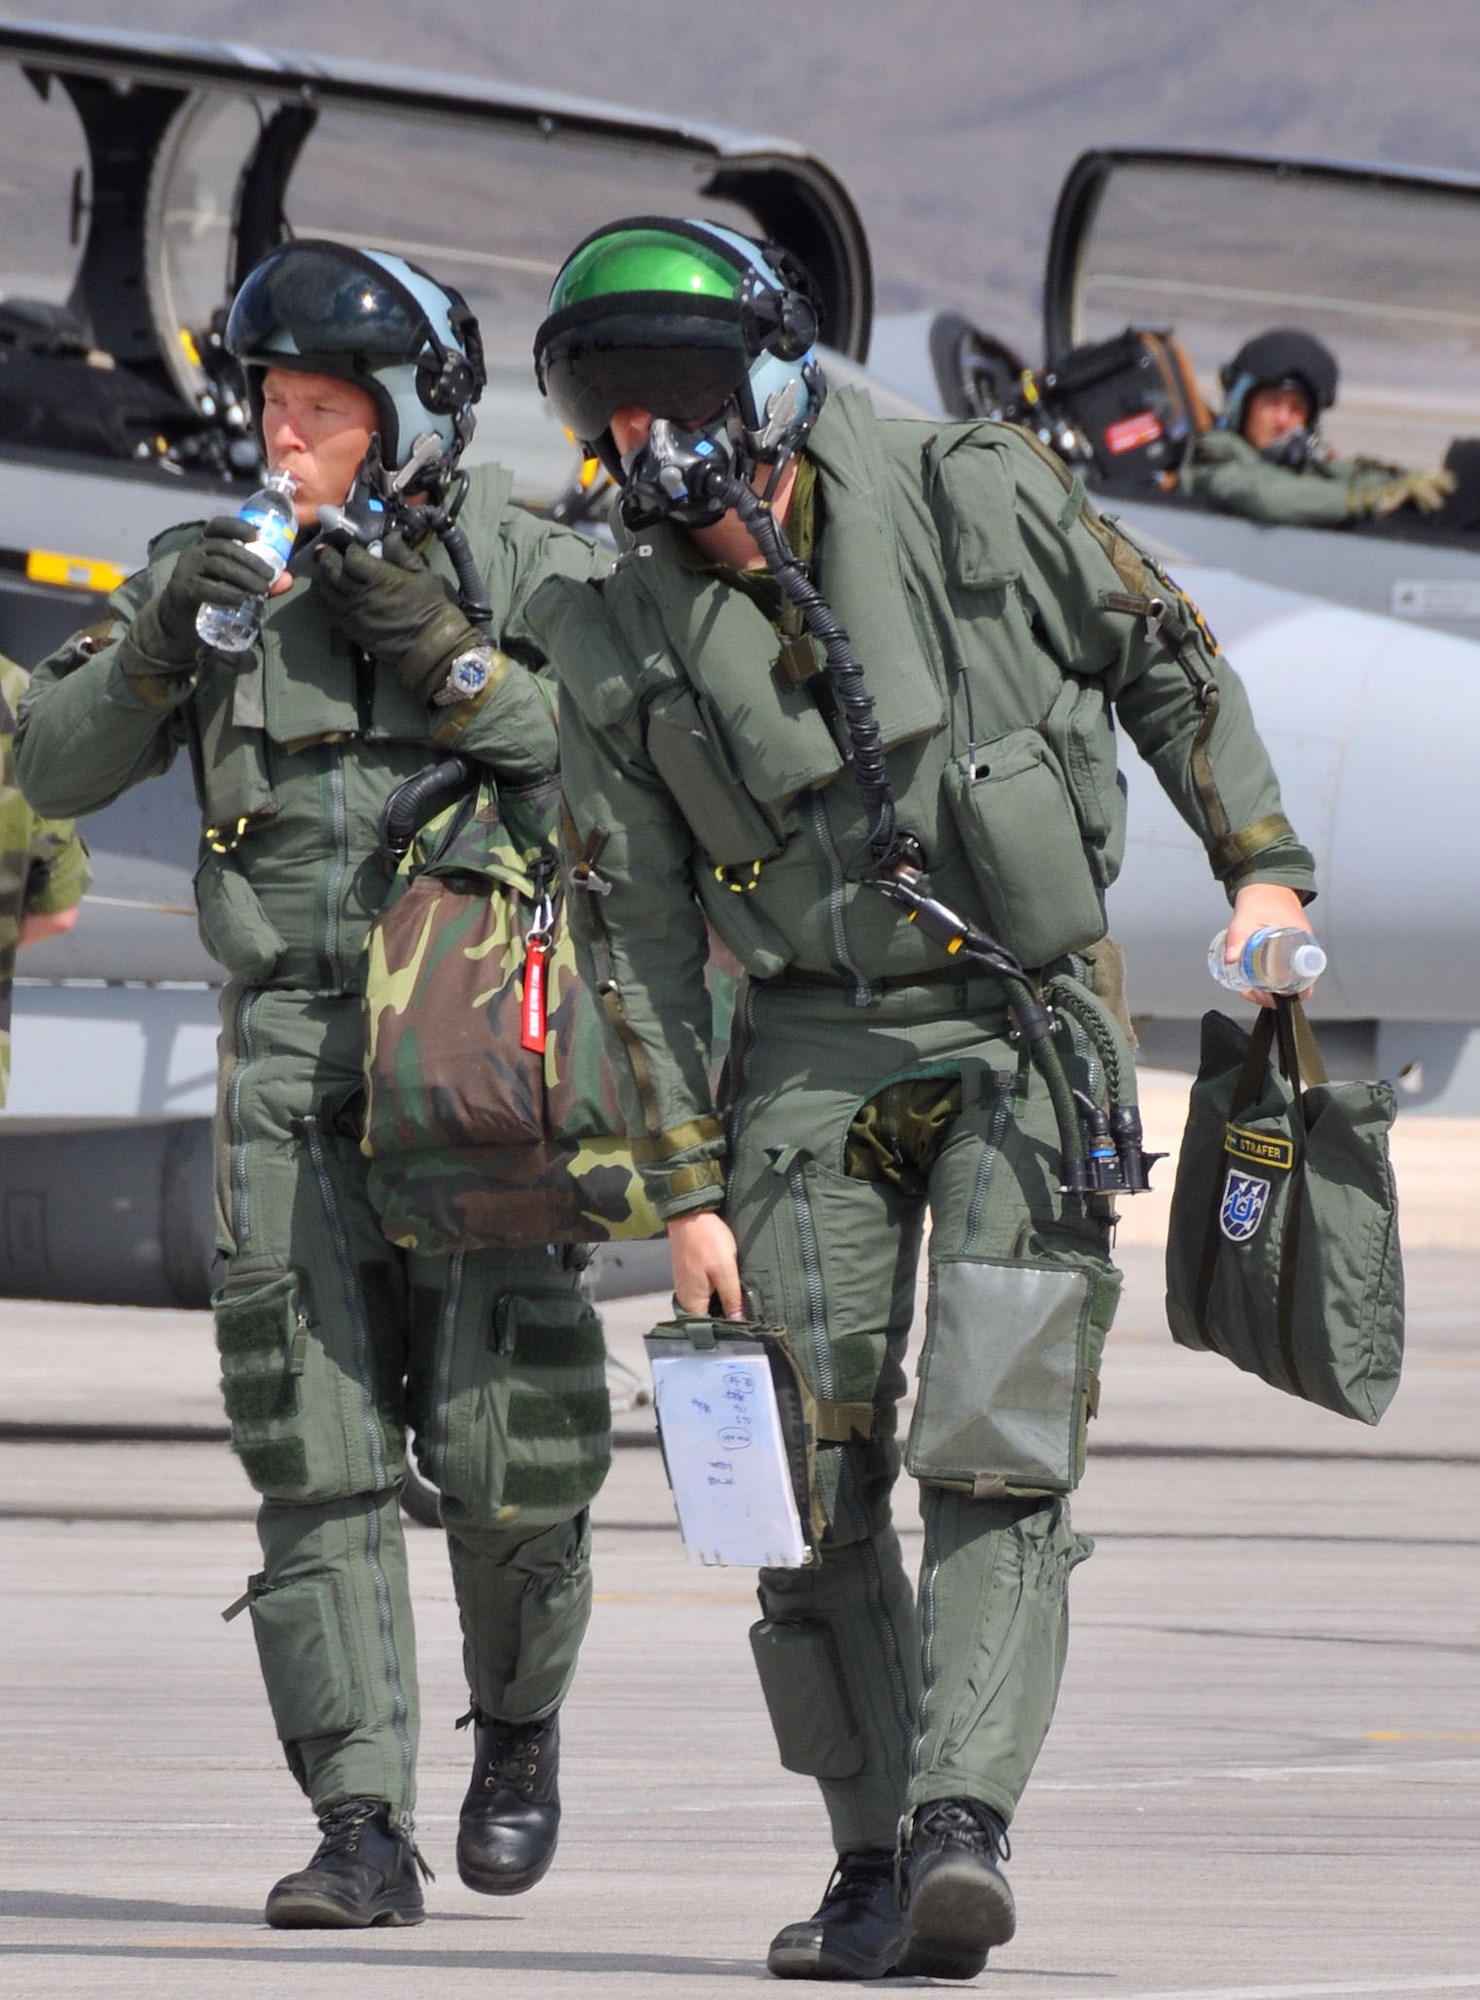 Swedish air force pilots from the 212nd Fighter Squadron at Norrbotten Wing, Sweden, arrive at Nellis AFB, Nev., for Red Flag 08-3.  Seven JAS-39 Gripen fighters and their crews are participating in their first Nellis Red Flag exercise.  They will be joined by U.S., Brazilian and Turkish forces for the exercise, which runs July 19 - Aug. 2.  (U.S. Air Force photo by Chief Master Sgt. Gary Emery)